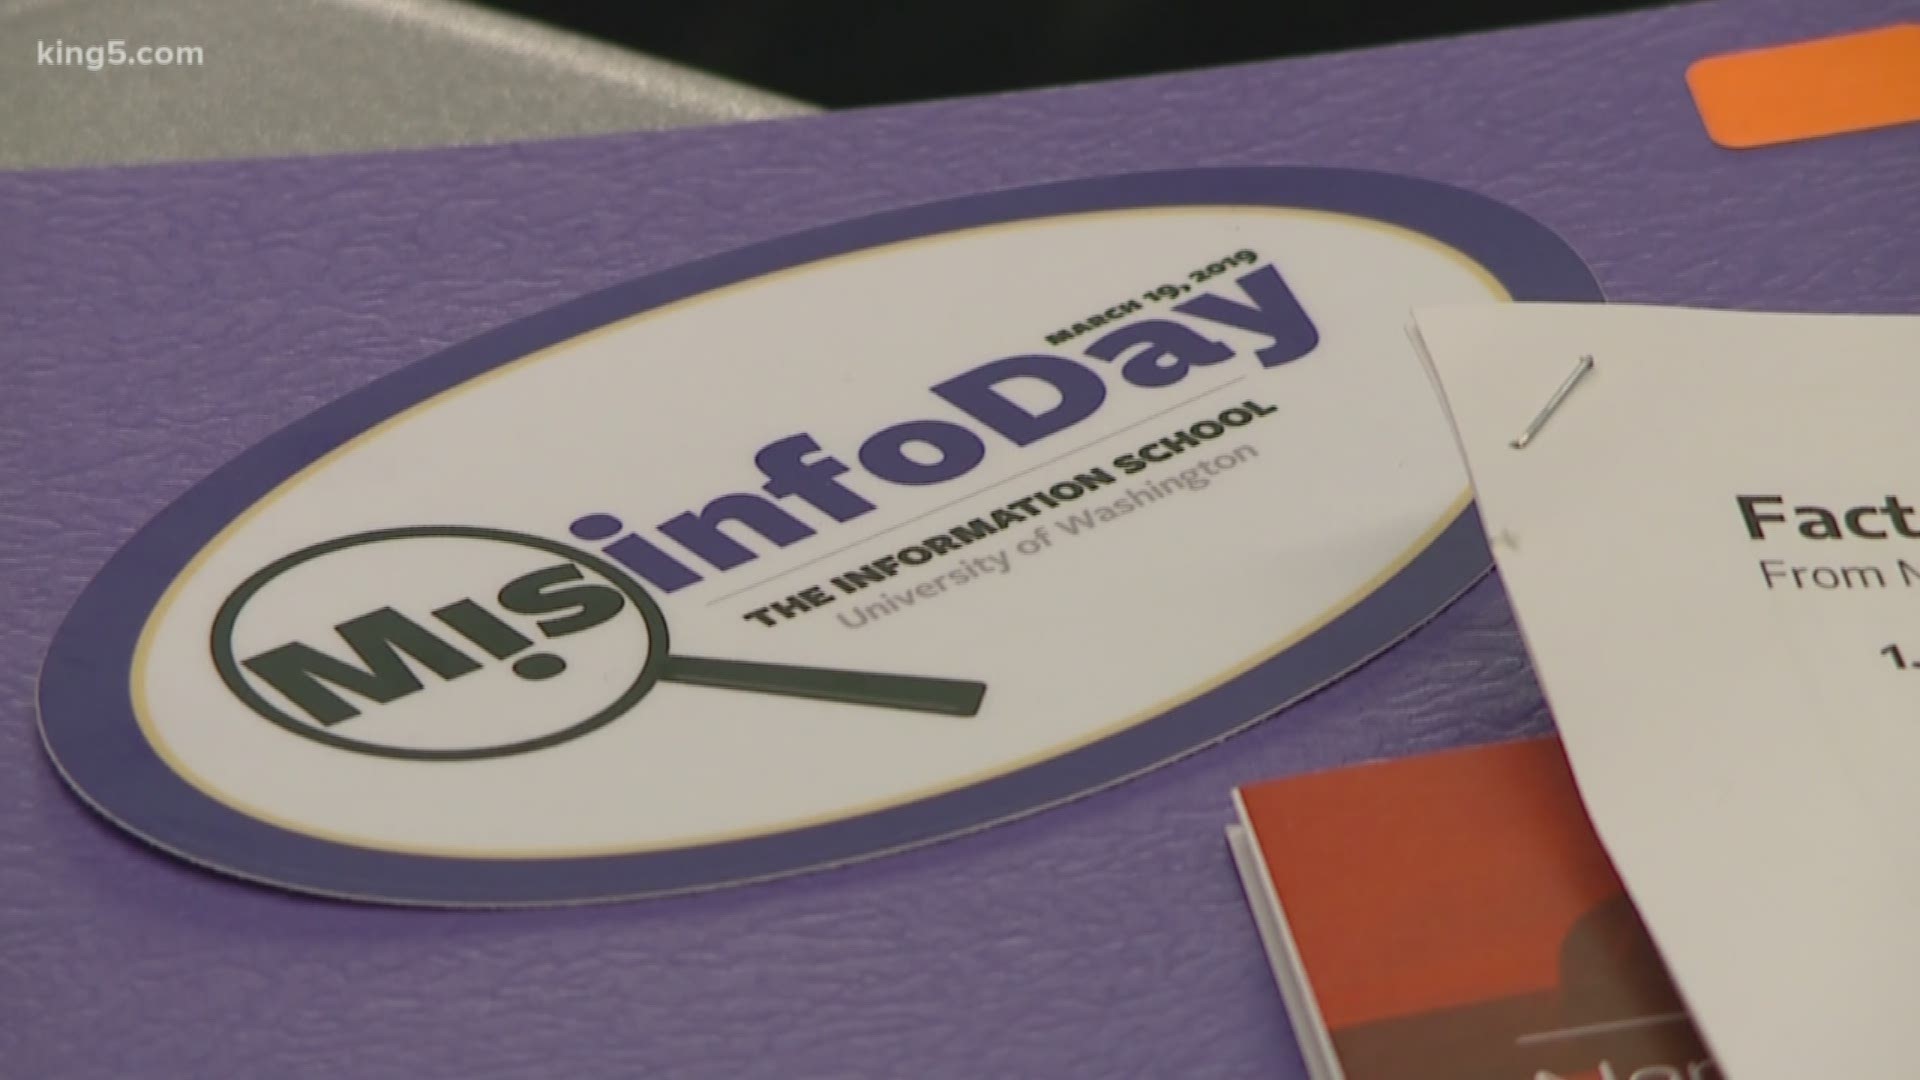 As concerns rise about misinformation spread on social media, there is a new effort to educate a younger generation about how to sort facts from fiction. A team at UW gathered high school students for "mis-info" day. It's a workshop that trains teens to scrutinize what others are sharing. KING 5's Ted Land reports.